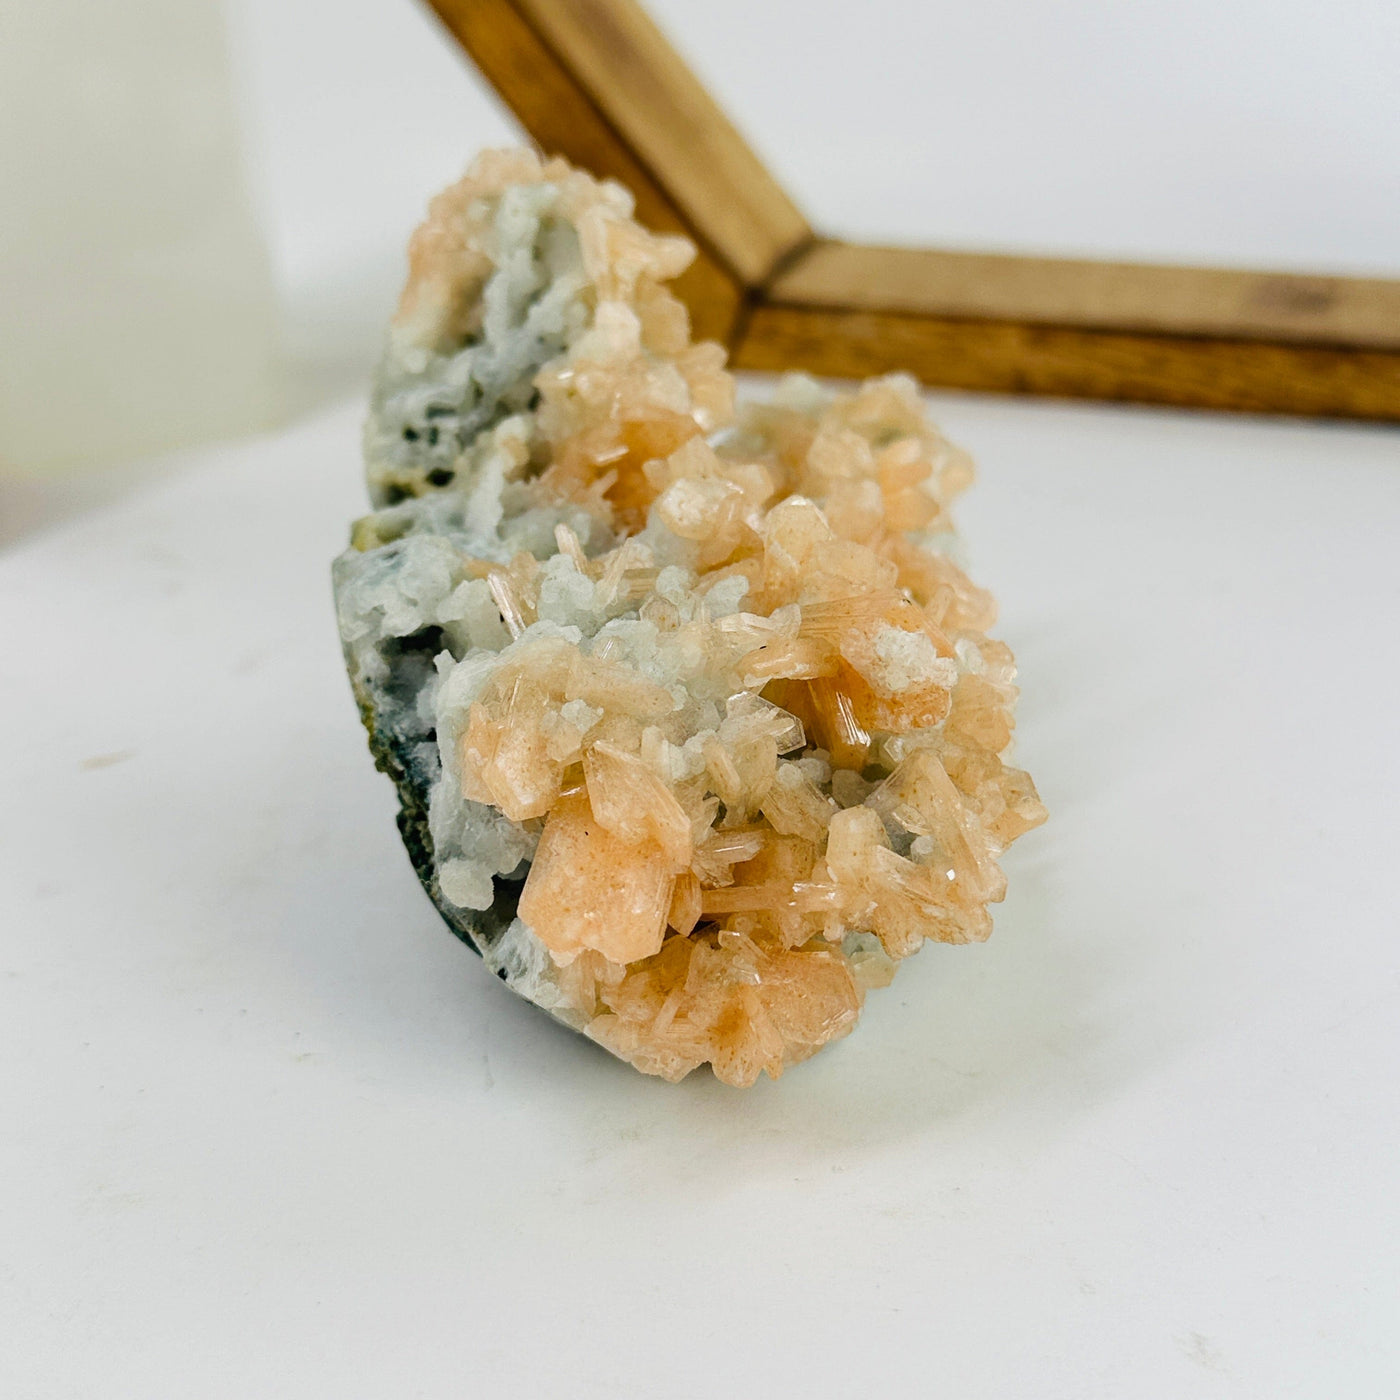 apophyllite with peach stilbite with decorations in the background